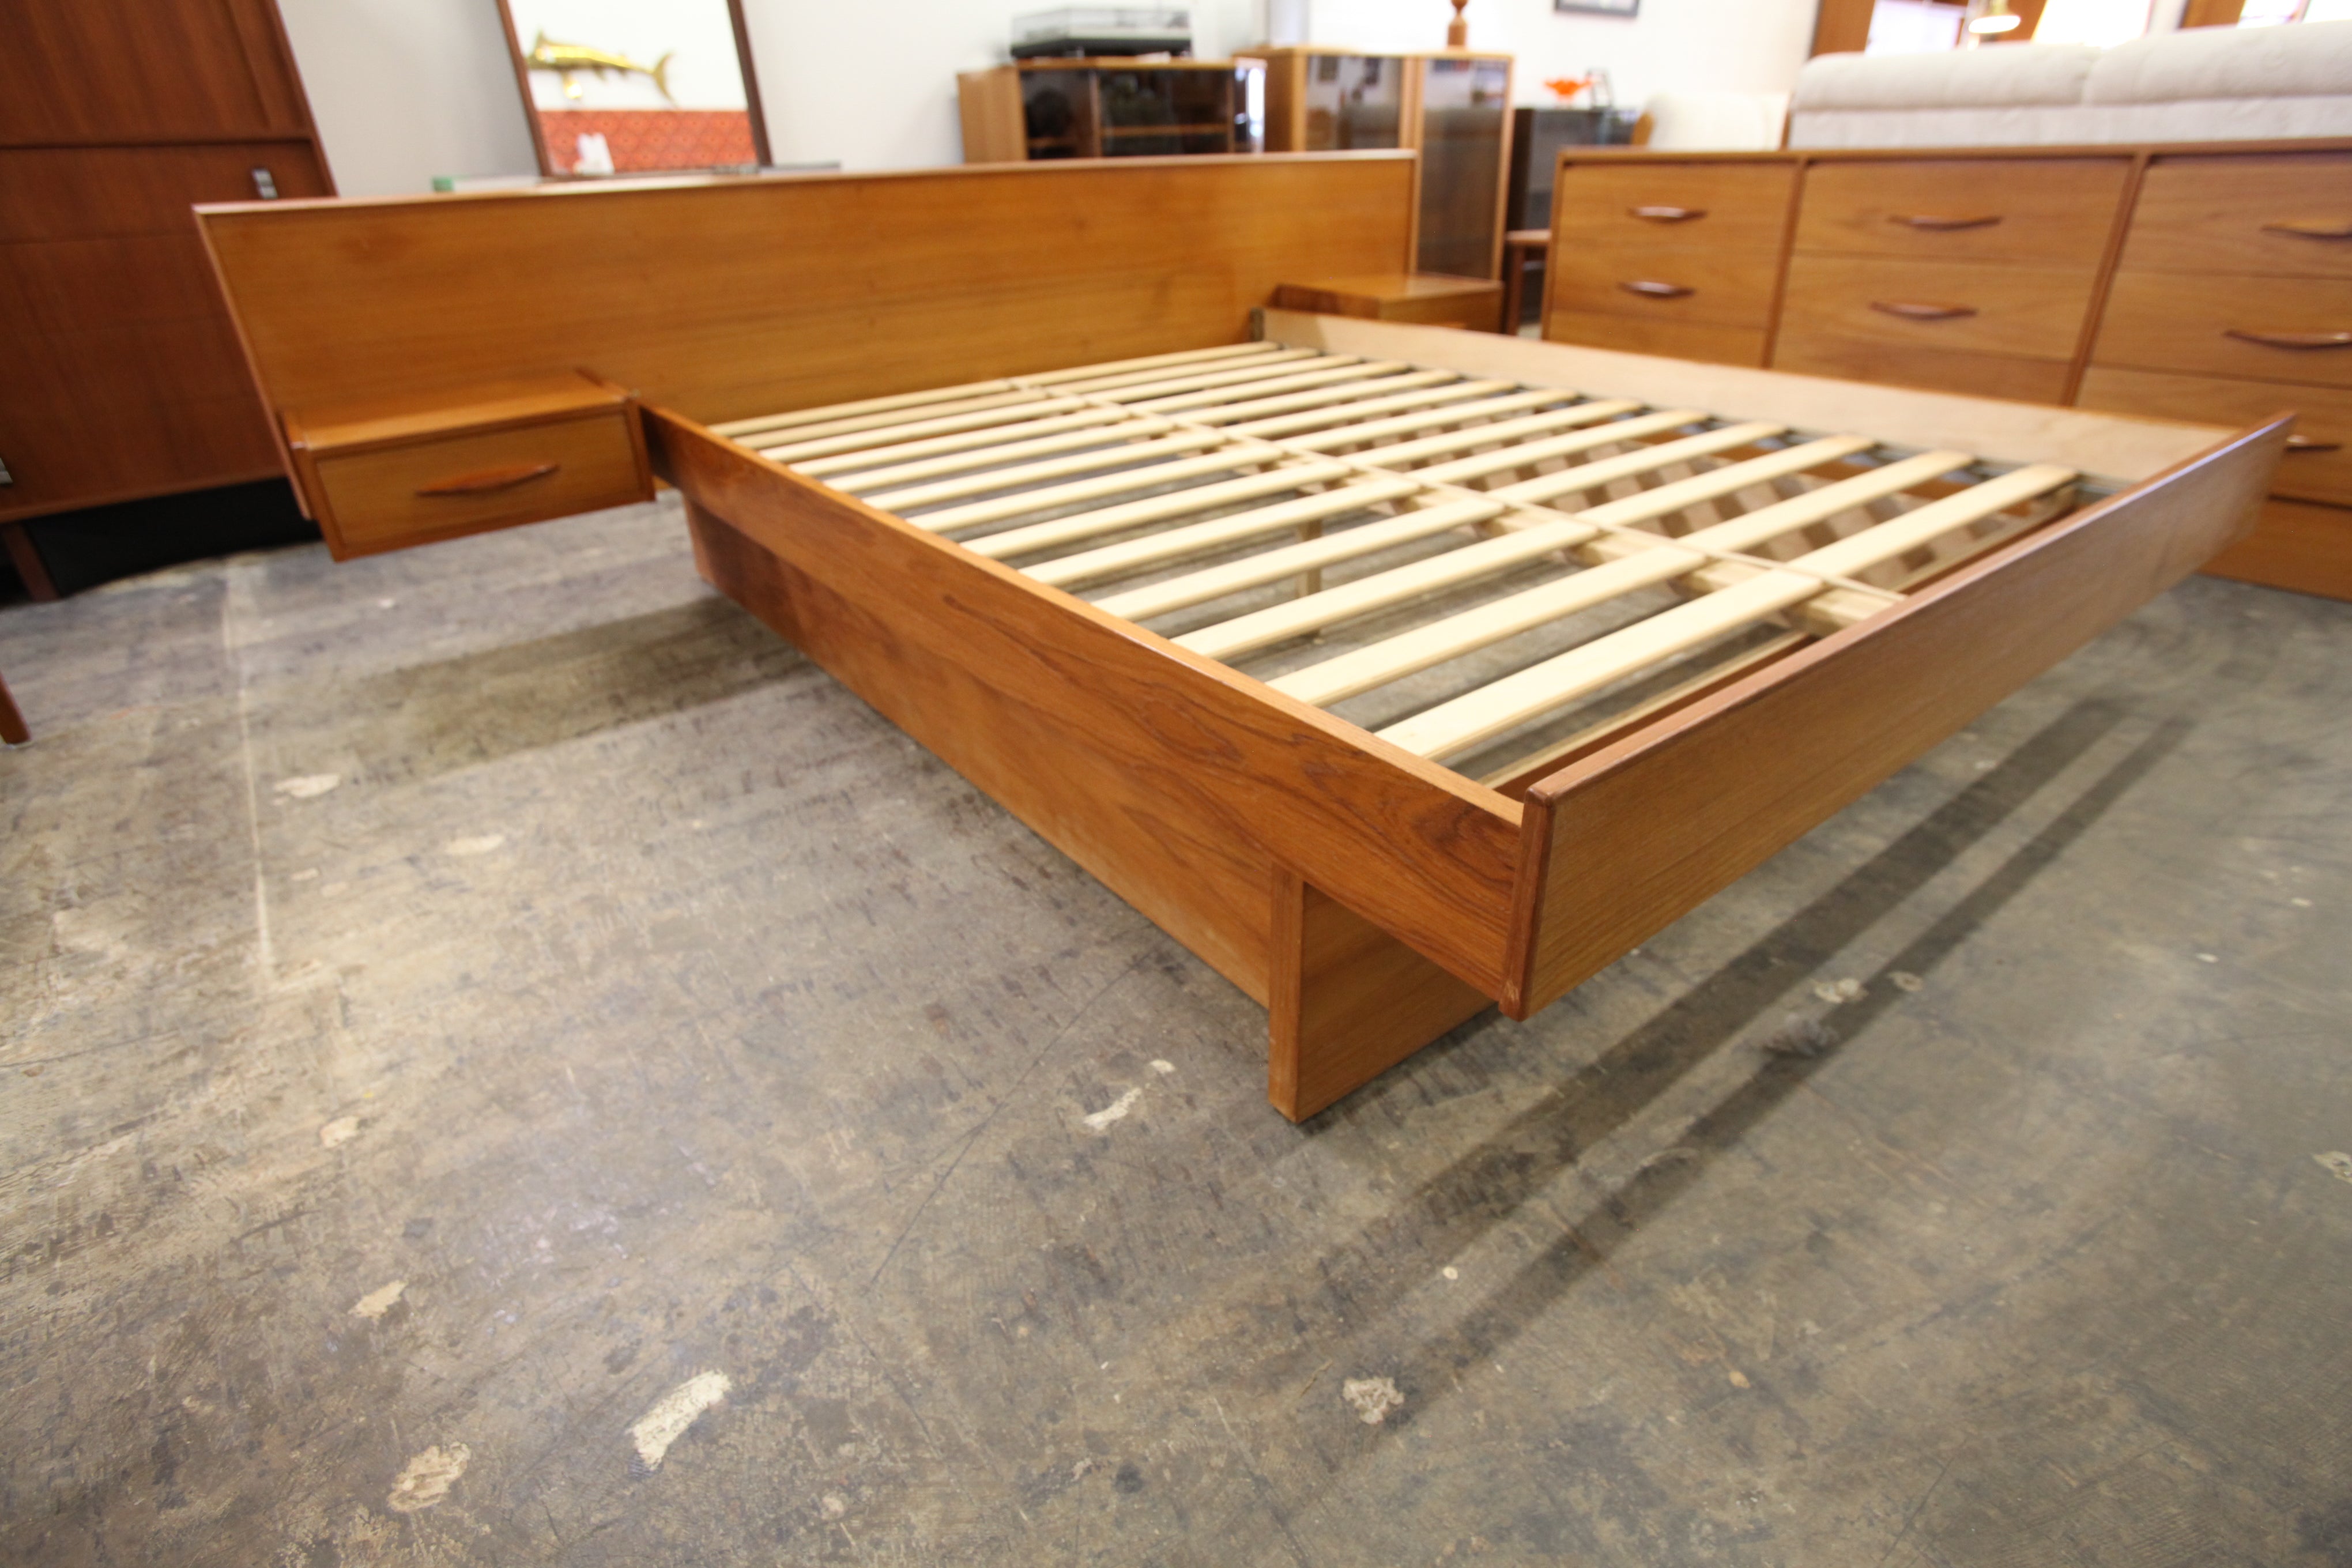 Vintage Teak Queen Size bed w/ Floating Night Stands (105"W x 82.5"D x 29"H)